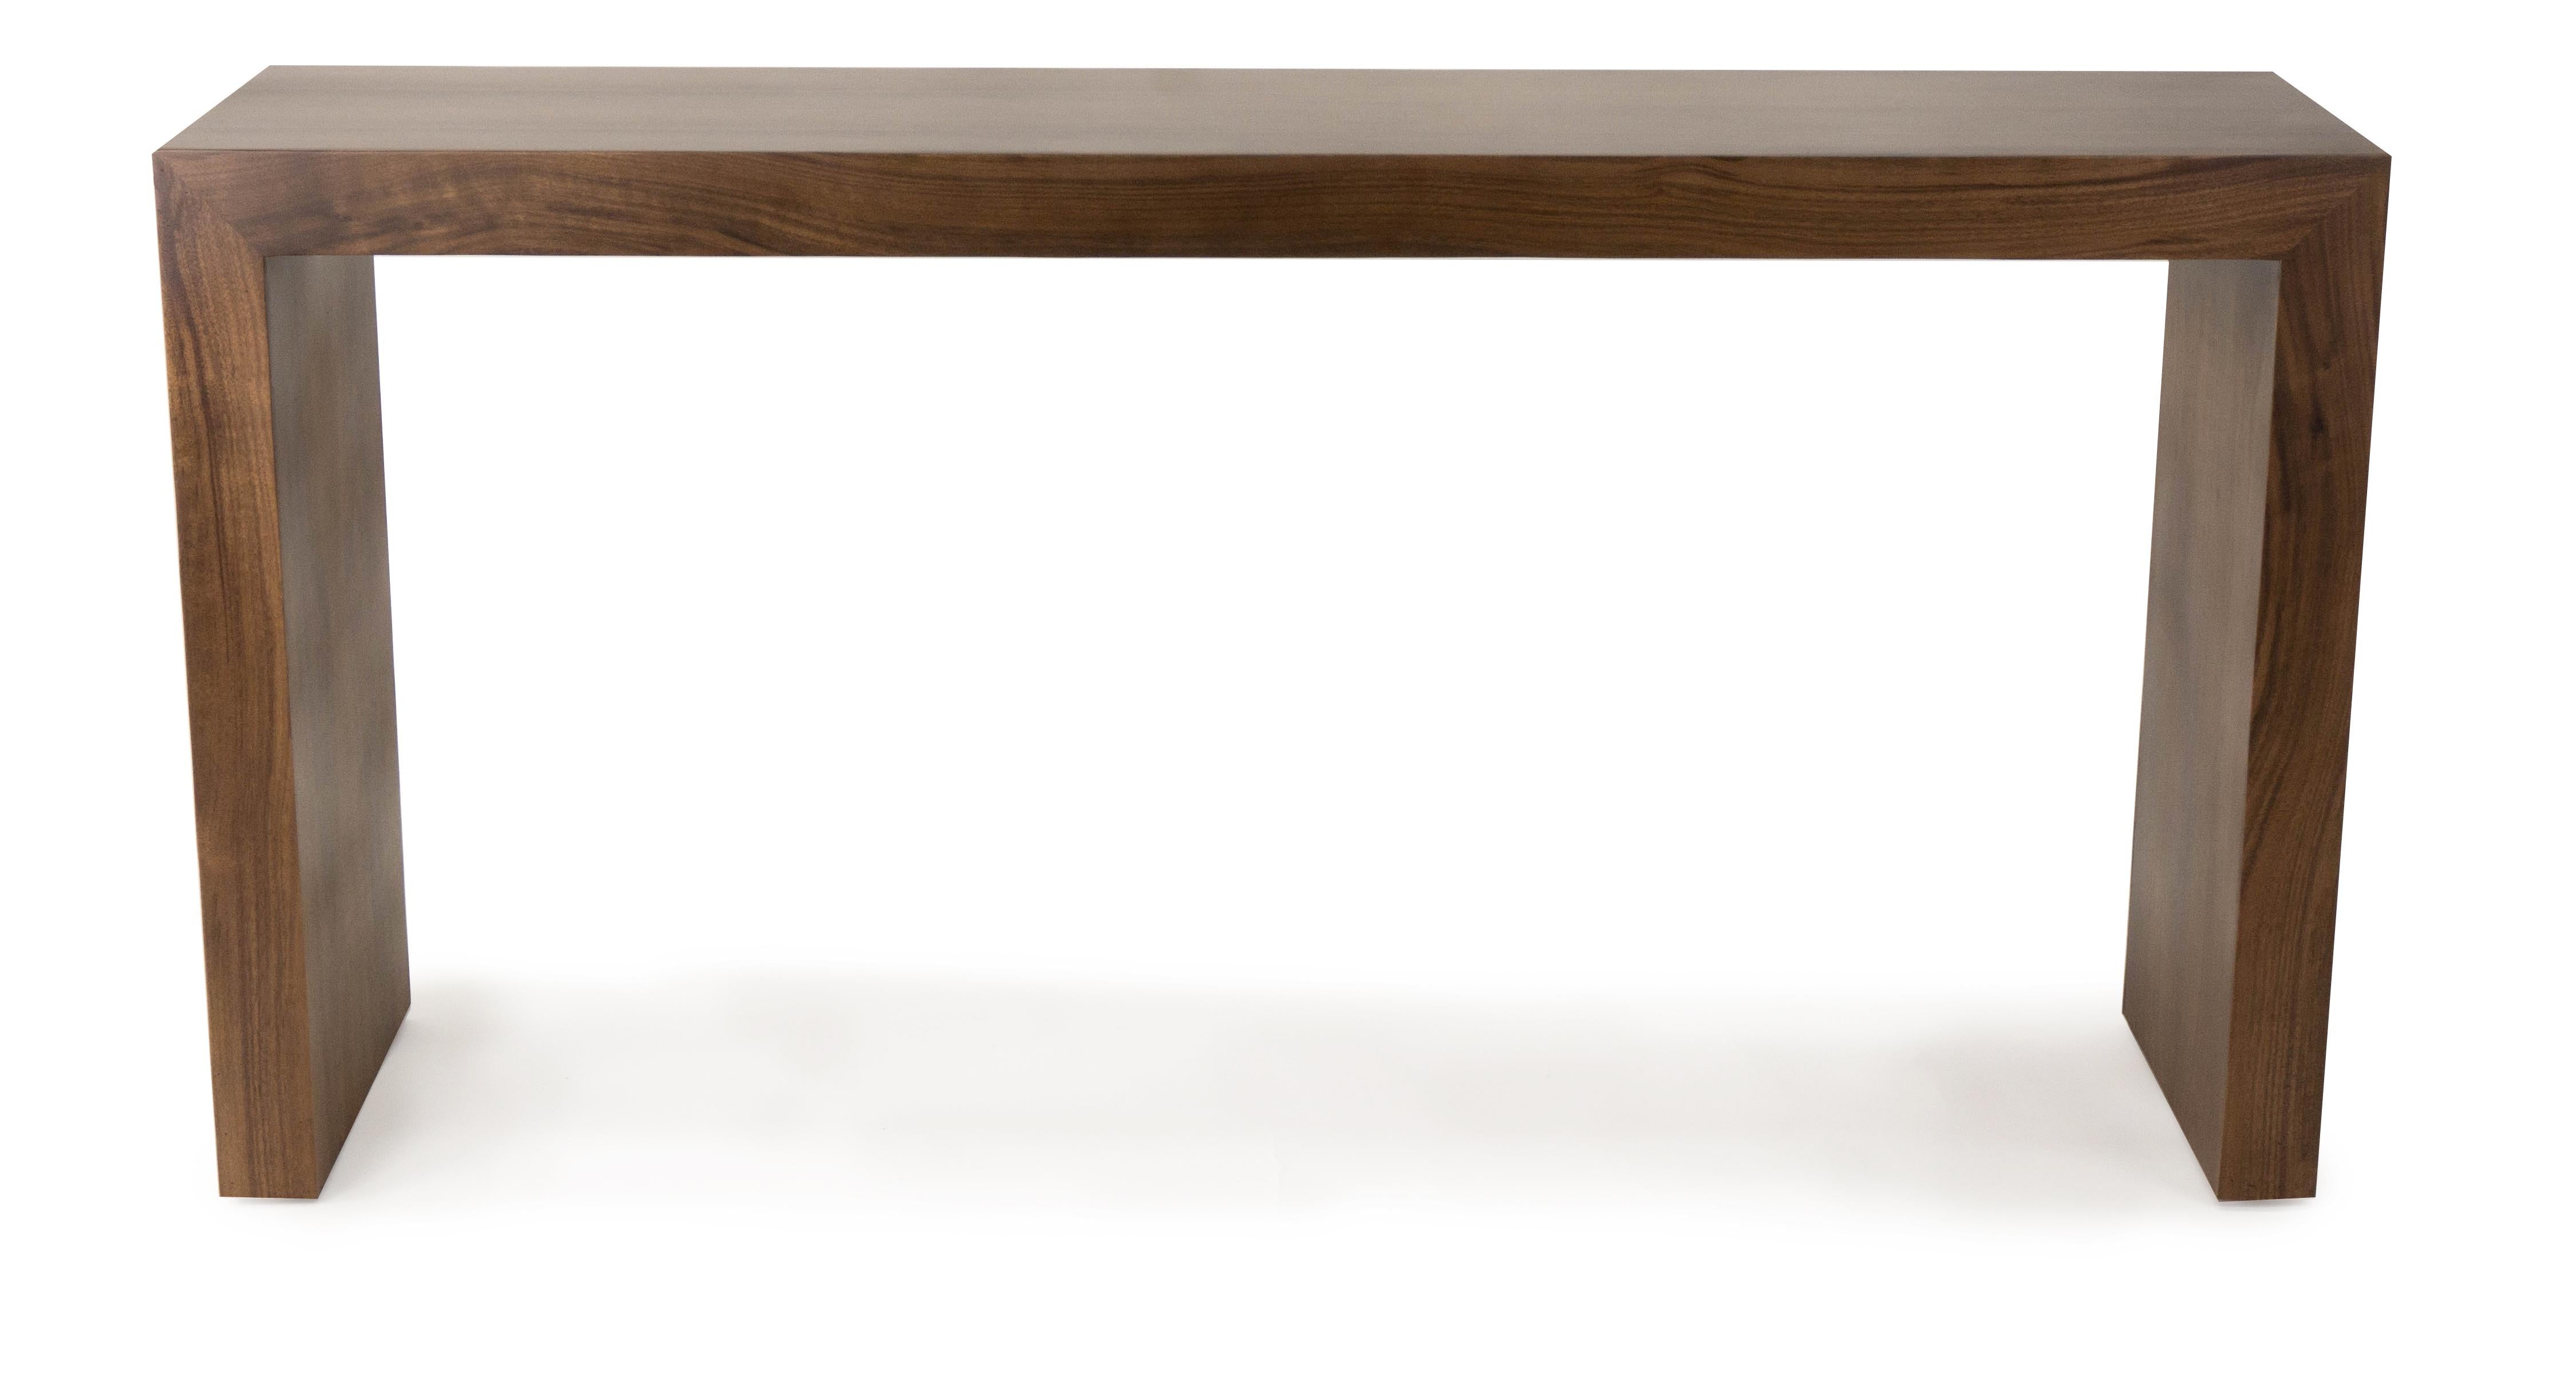 Our classic Waterfall table has been built with a walnut veneer and finished with a clear matte lacquer. Size finish are customizable.

Measurements:
60